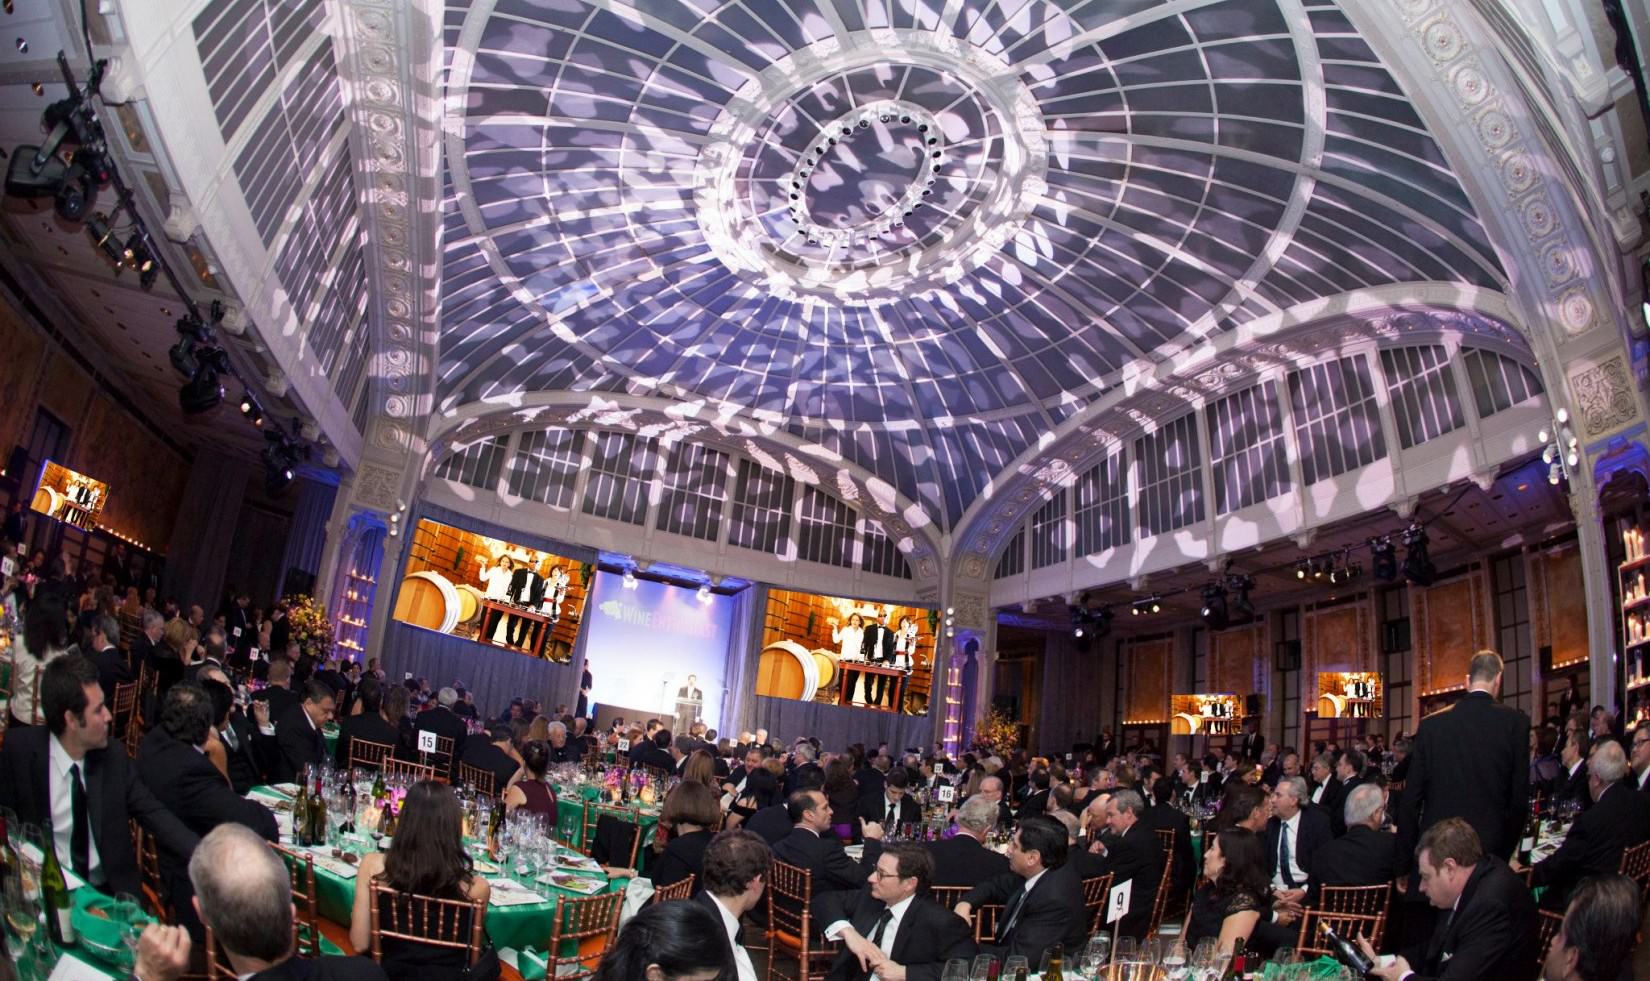 Guests gathered at a Wine Enthusiast Star Awards event at New York Public Library